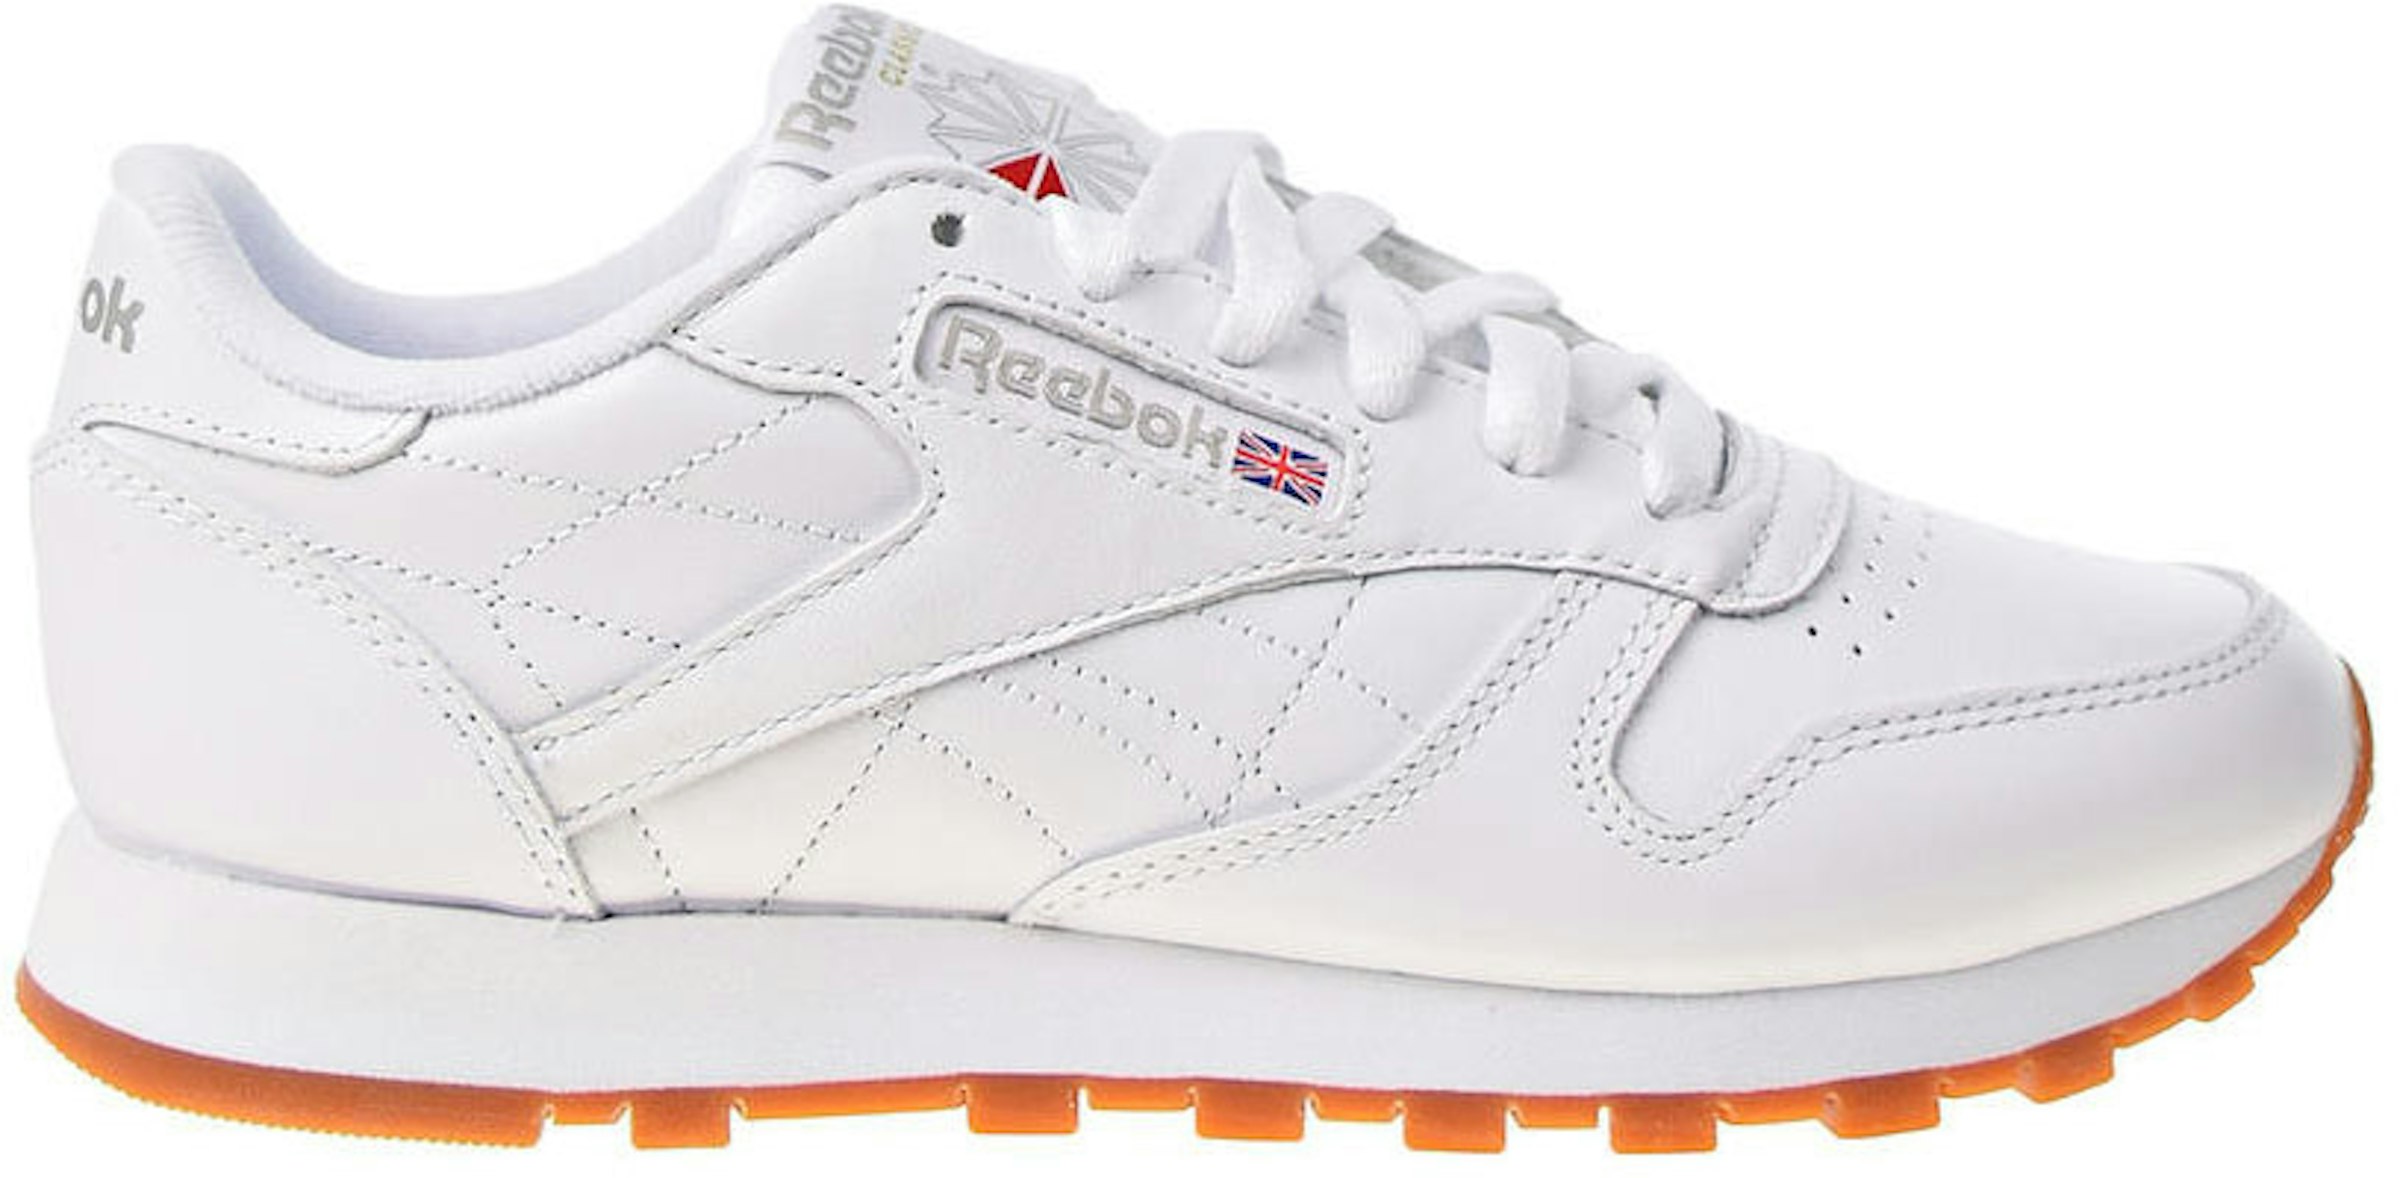 Aftensmad Glamour Guggenheim Museum Reebok Classic Leather White Gum (Women's) - 49801 - US